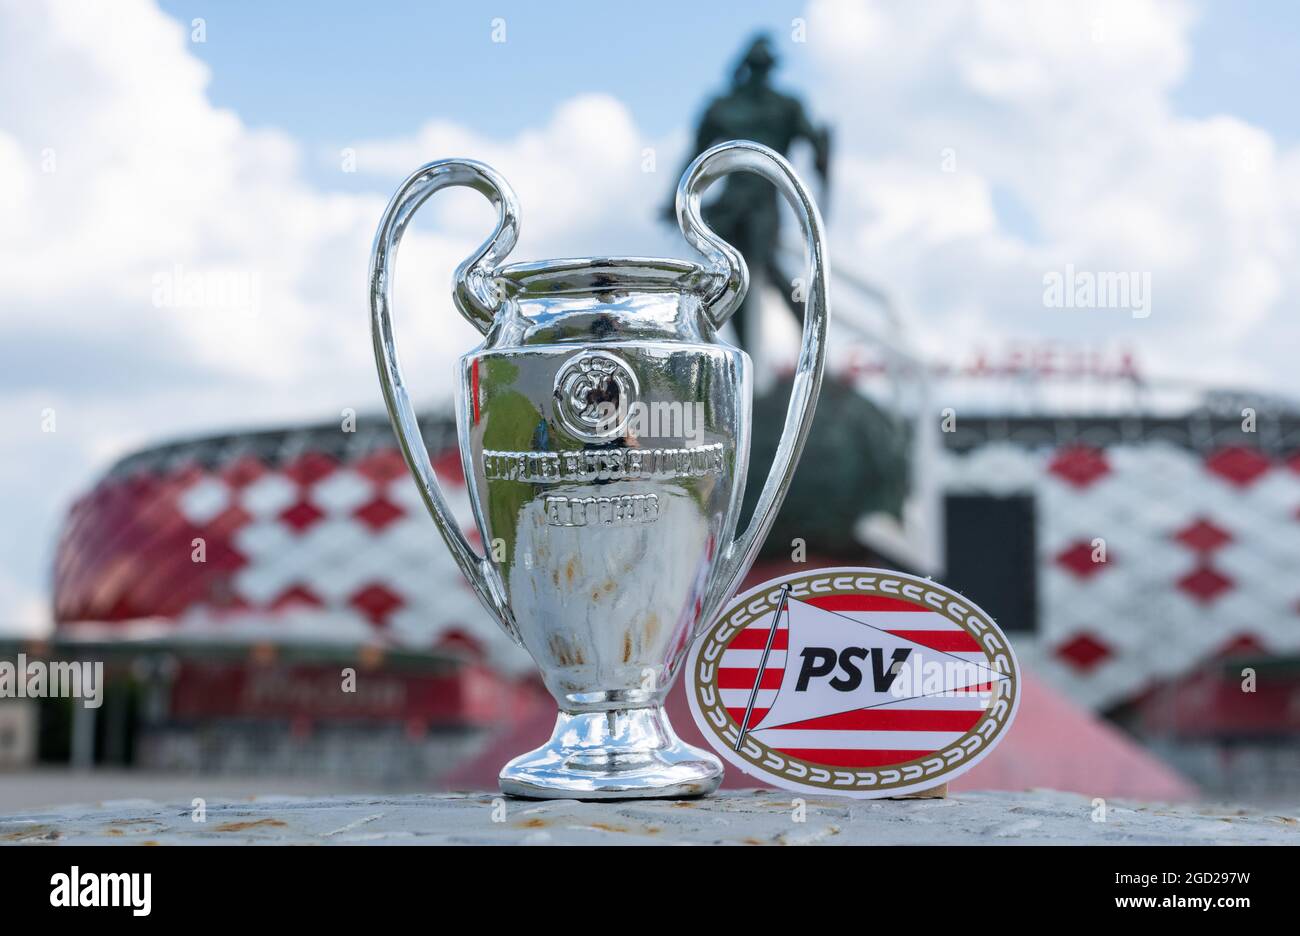 June 14, 2021 Eindhoven, Netherlands. The emblem of the PSV Eindhoven football club against the background of a modern stadium. Stock Photo